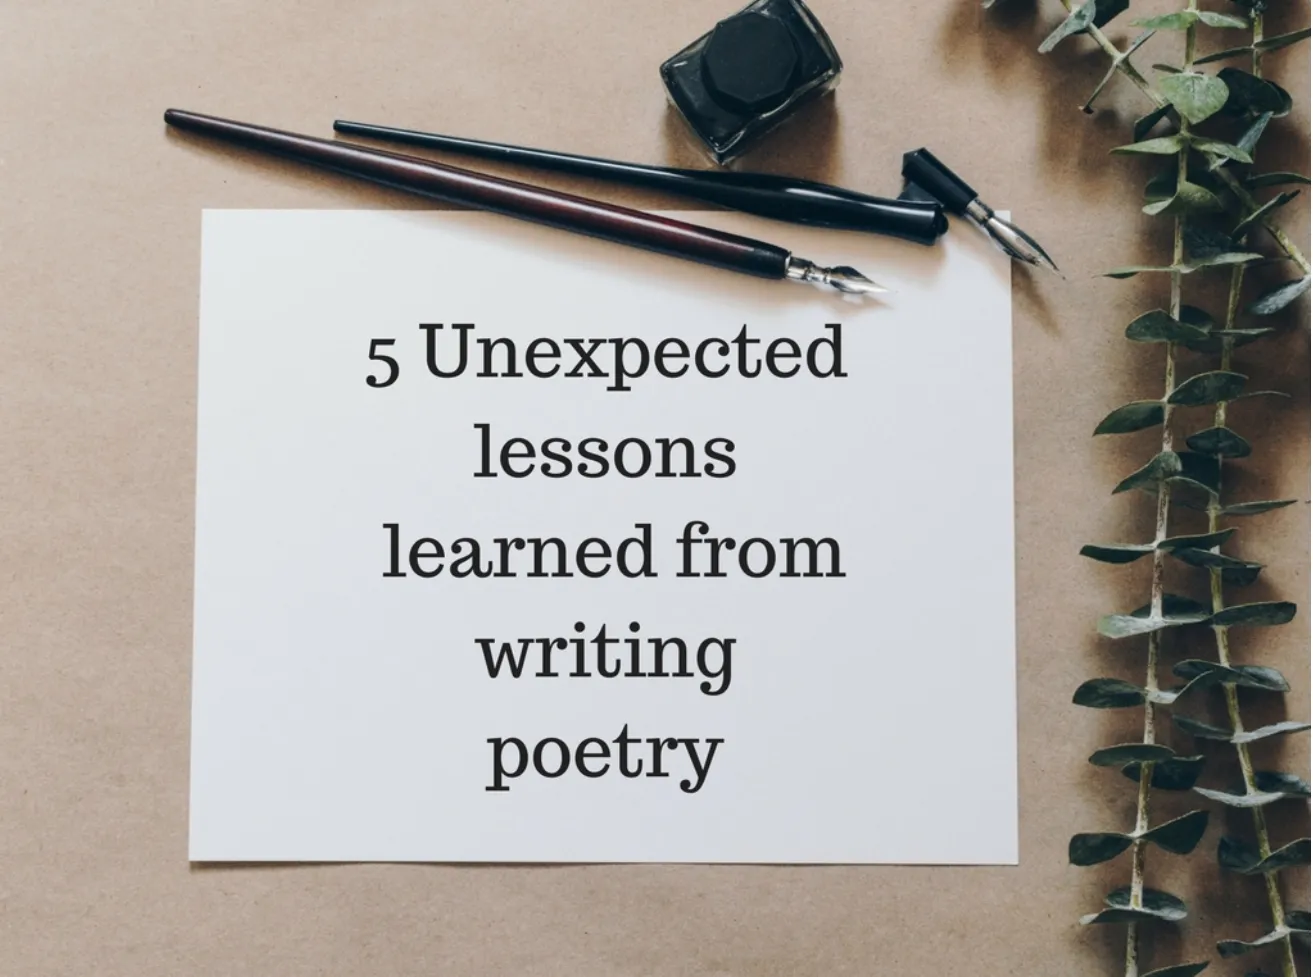 5 Unexpected Lessons Learned from Writing Poetry